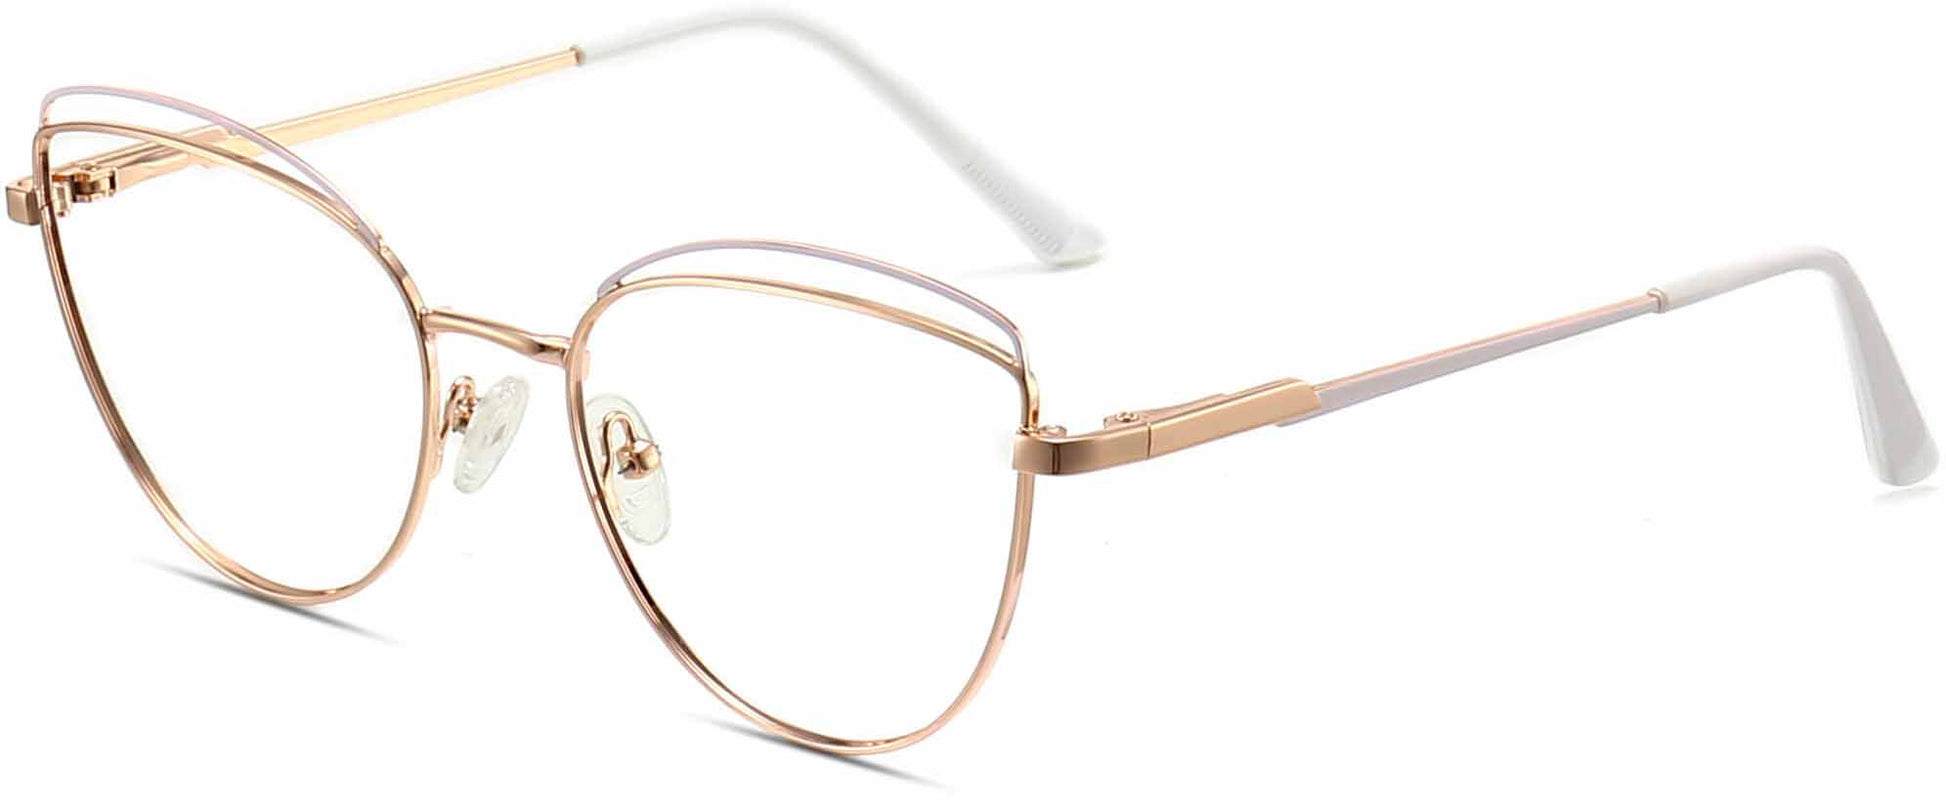 Maeve Cateye Gold Eyeglasses from ANRRI, angle view